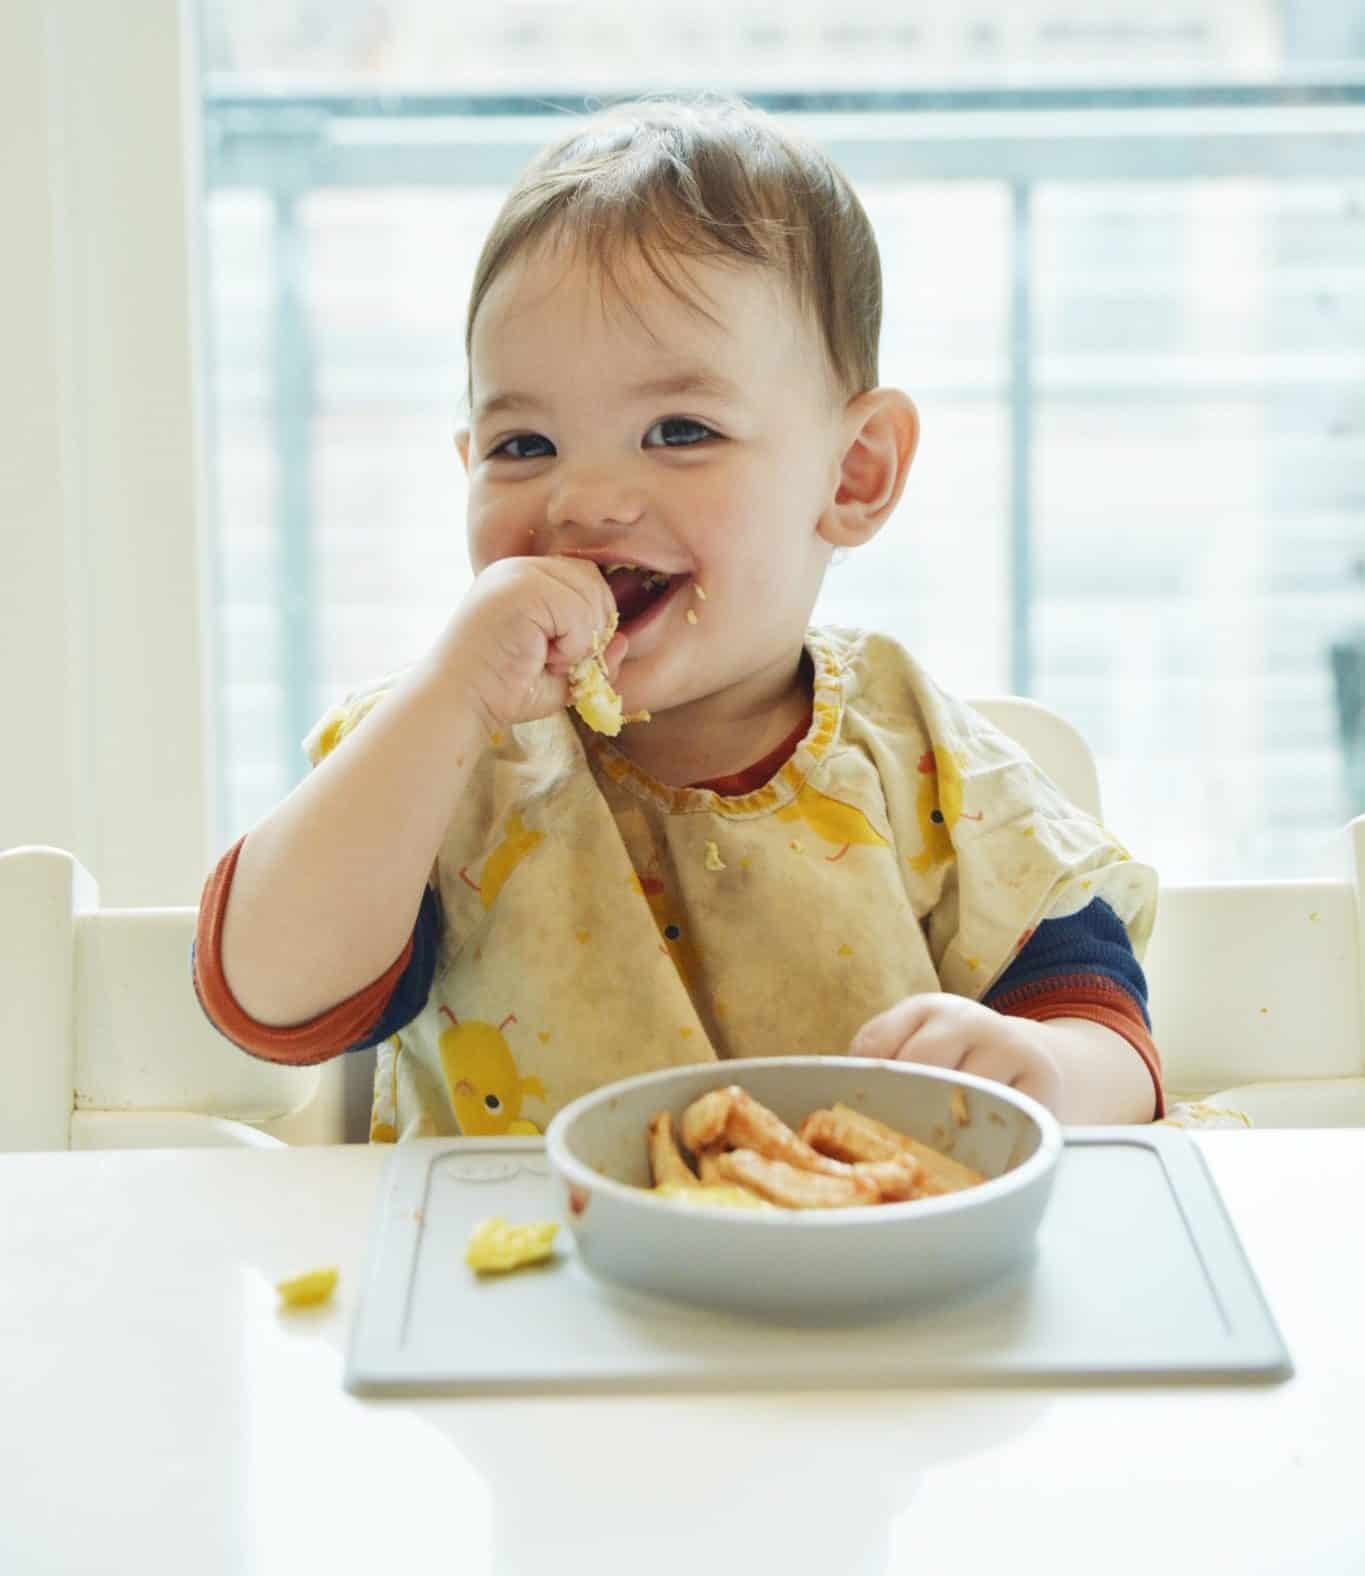 Our Experience with Baby Led Weaning